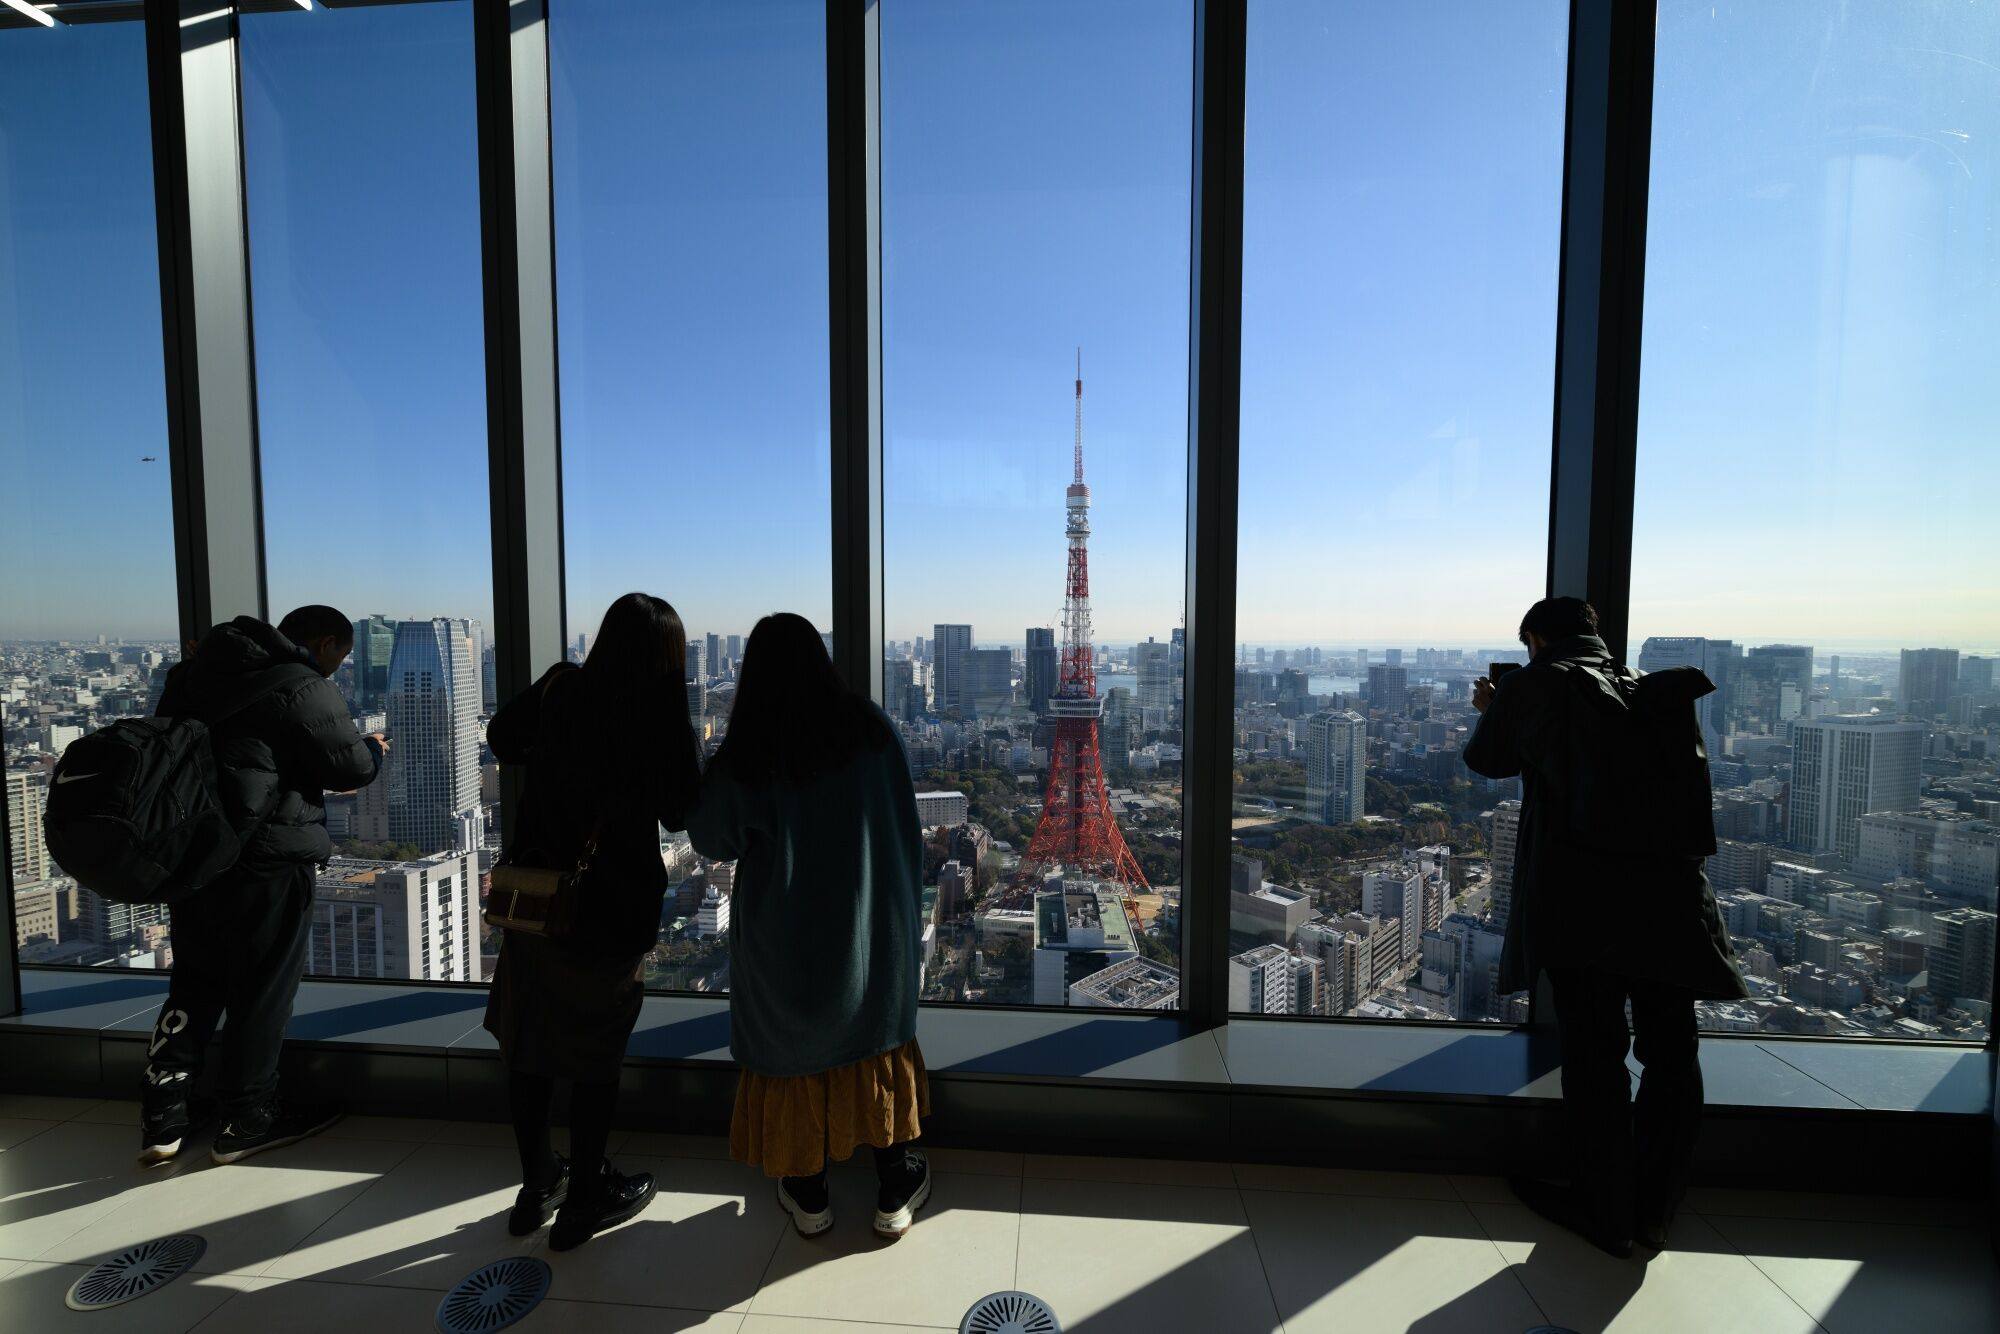 View of Tokyo Tower from the observatory at the Azabudai Hills Mori JP Tower in Tokyo. The dispatch of such a specialised China watcher to the embassy is part of the Biden administration’s efforts to reinforce intelligence gathering, according to the sources. Photo: Bloomberg